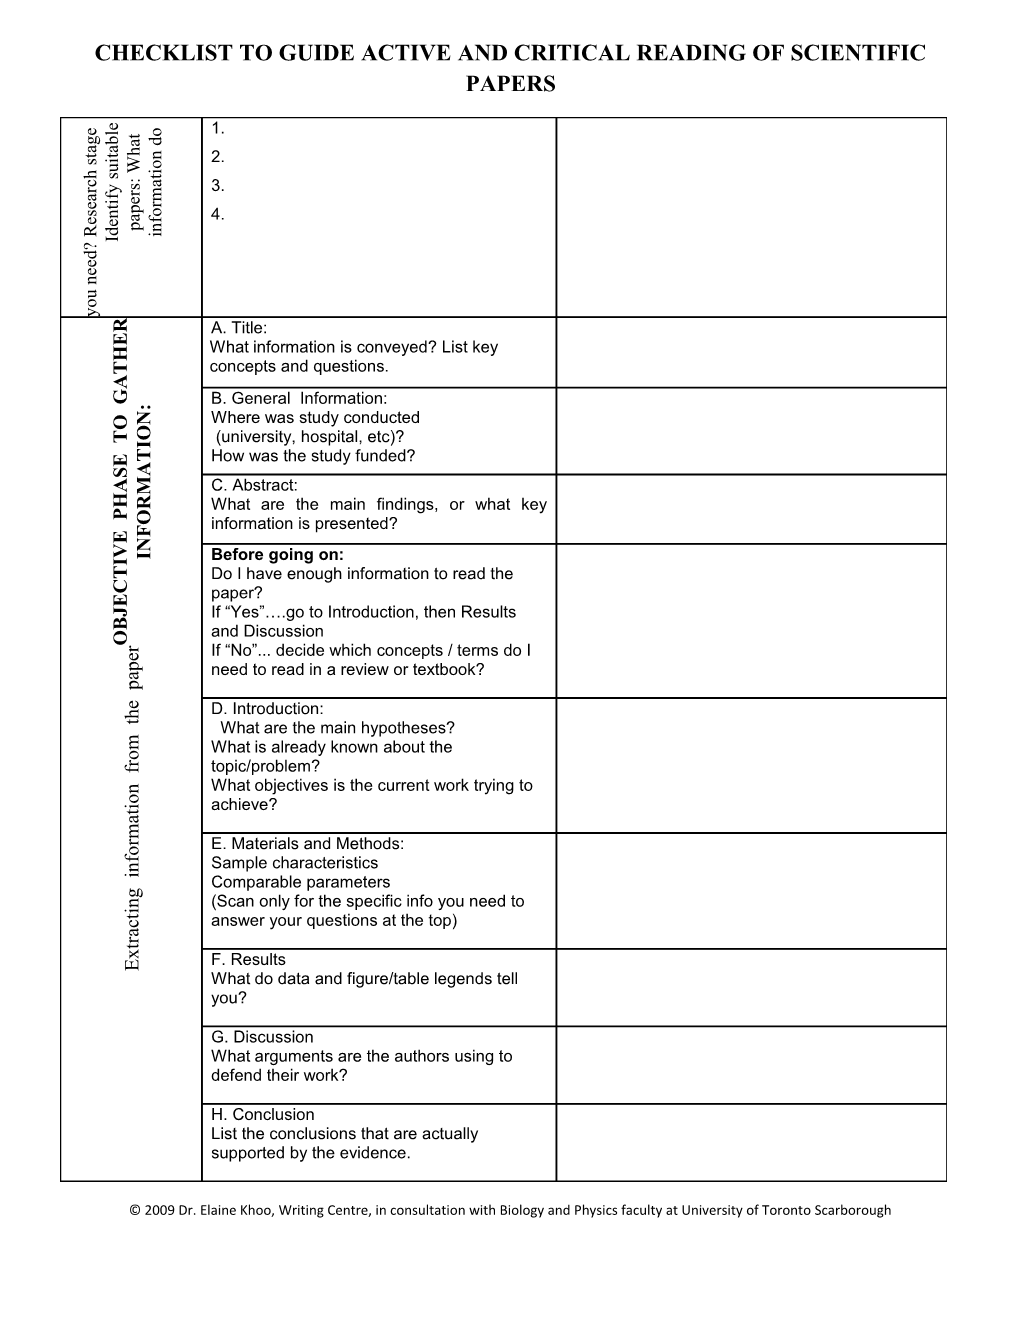 Checklist to Guide Active and Critical Reading of Scientific Papers